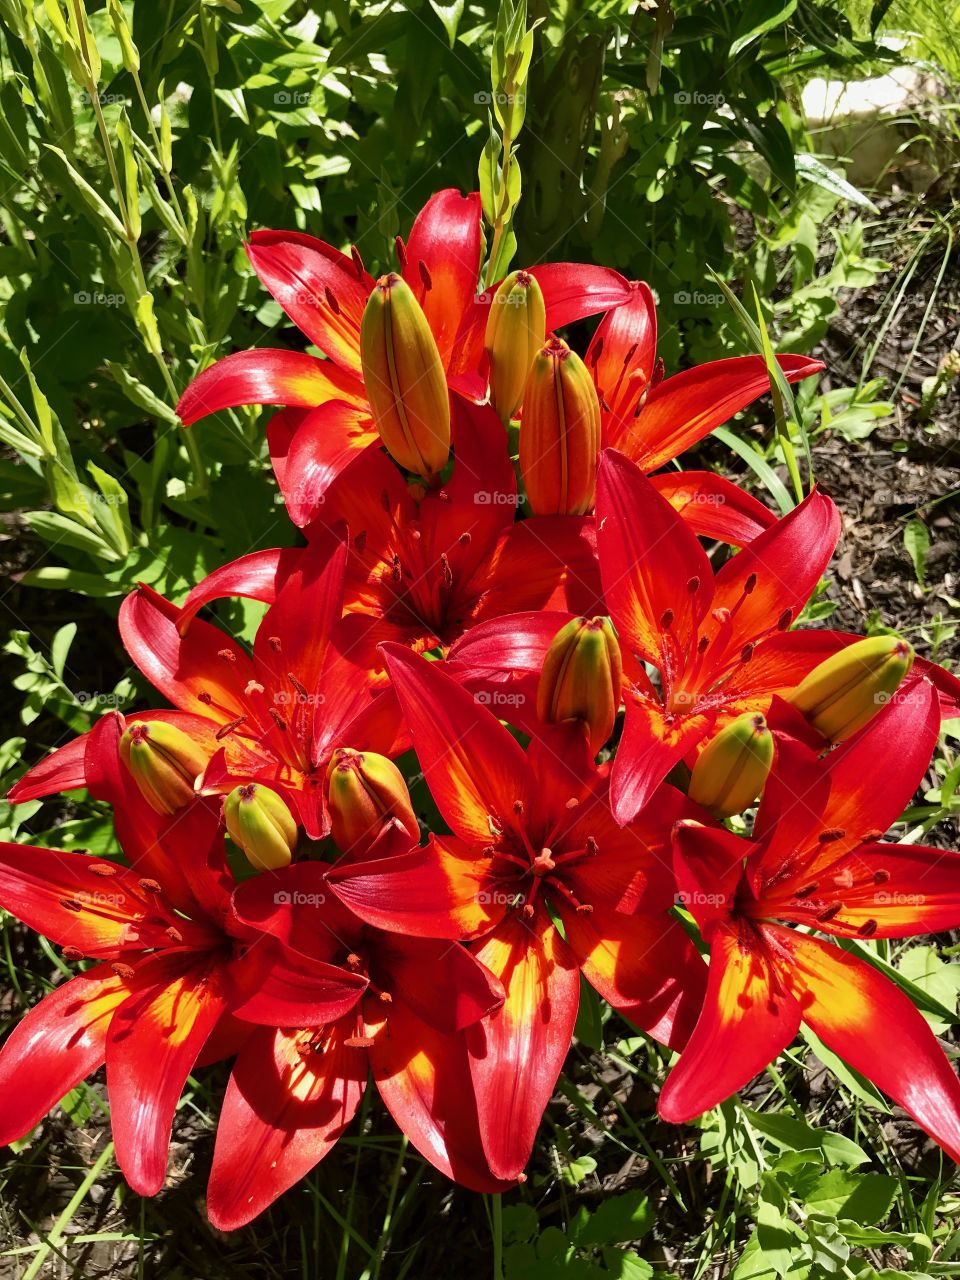 Lovely, vibrant red lilies